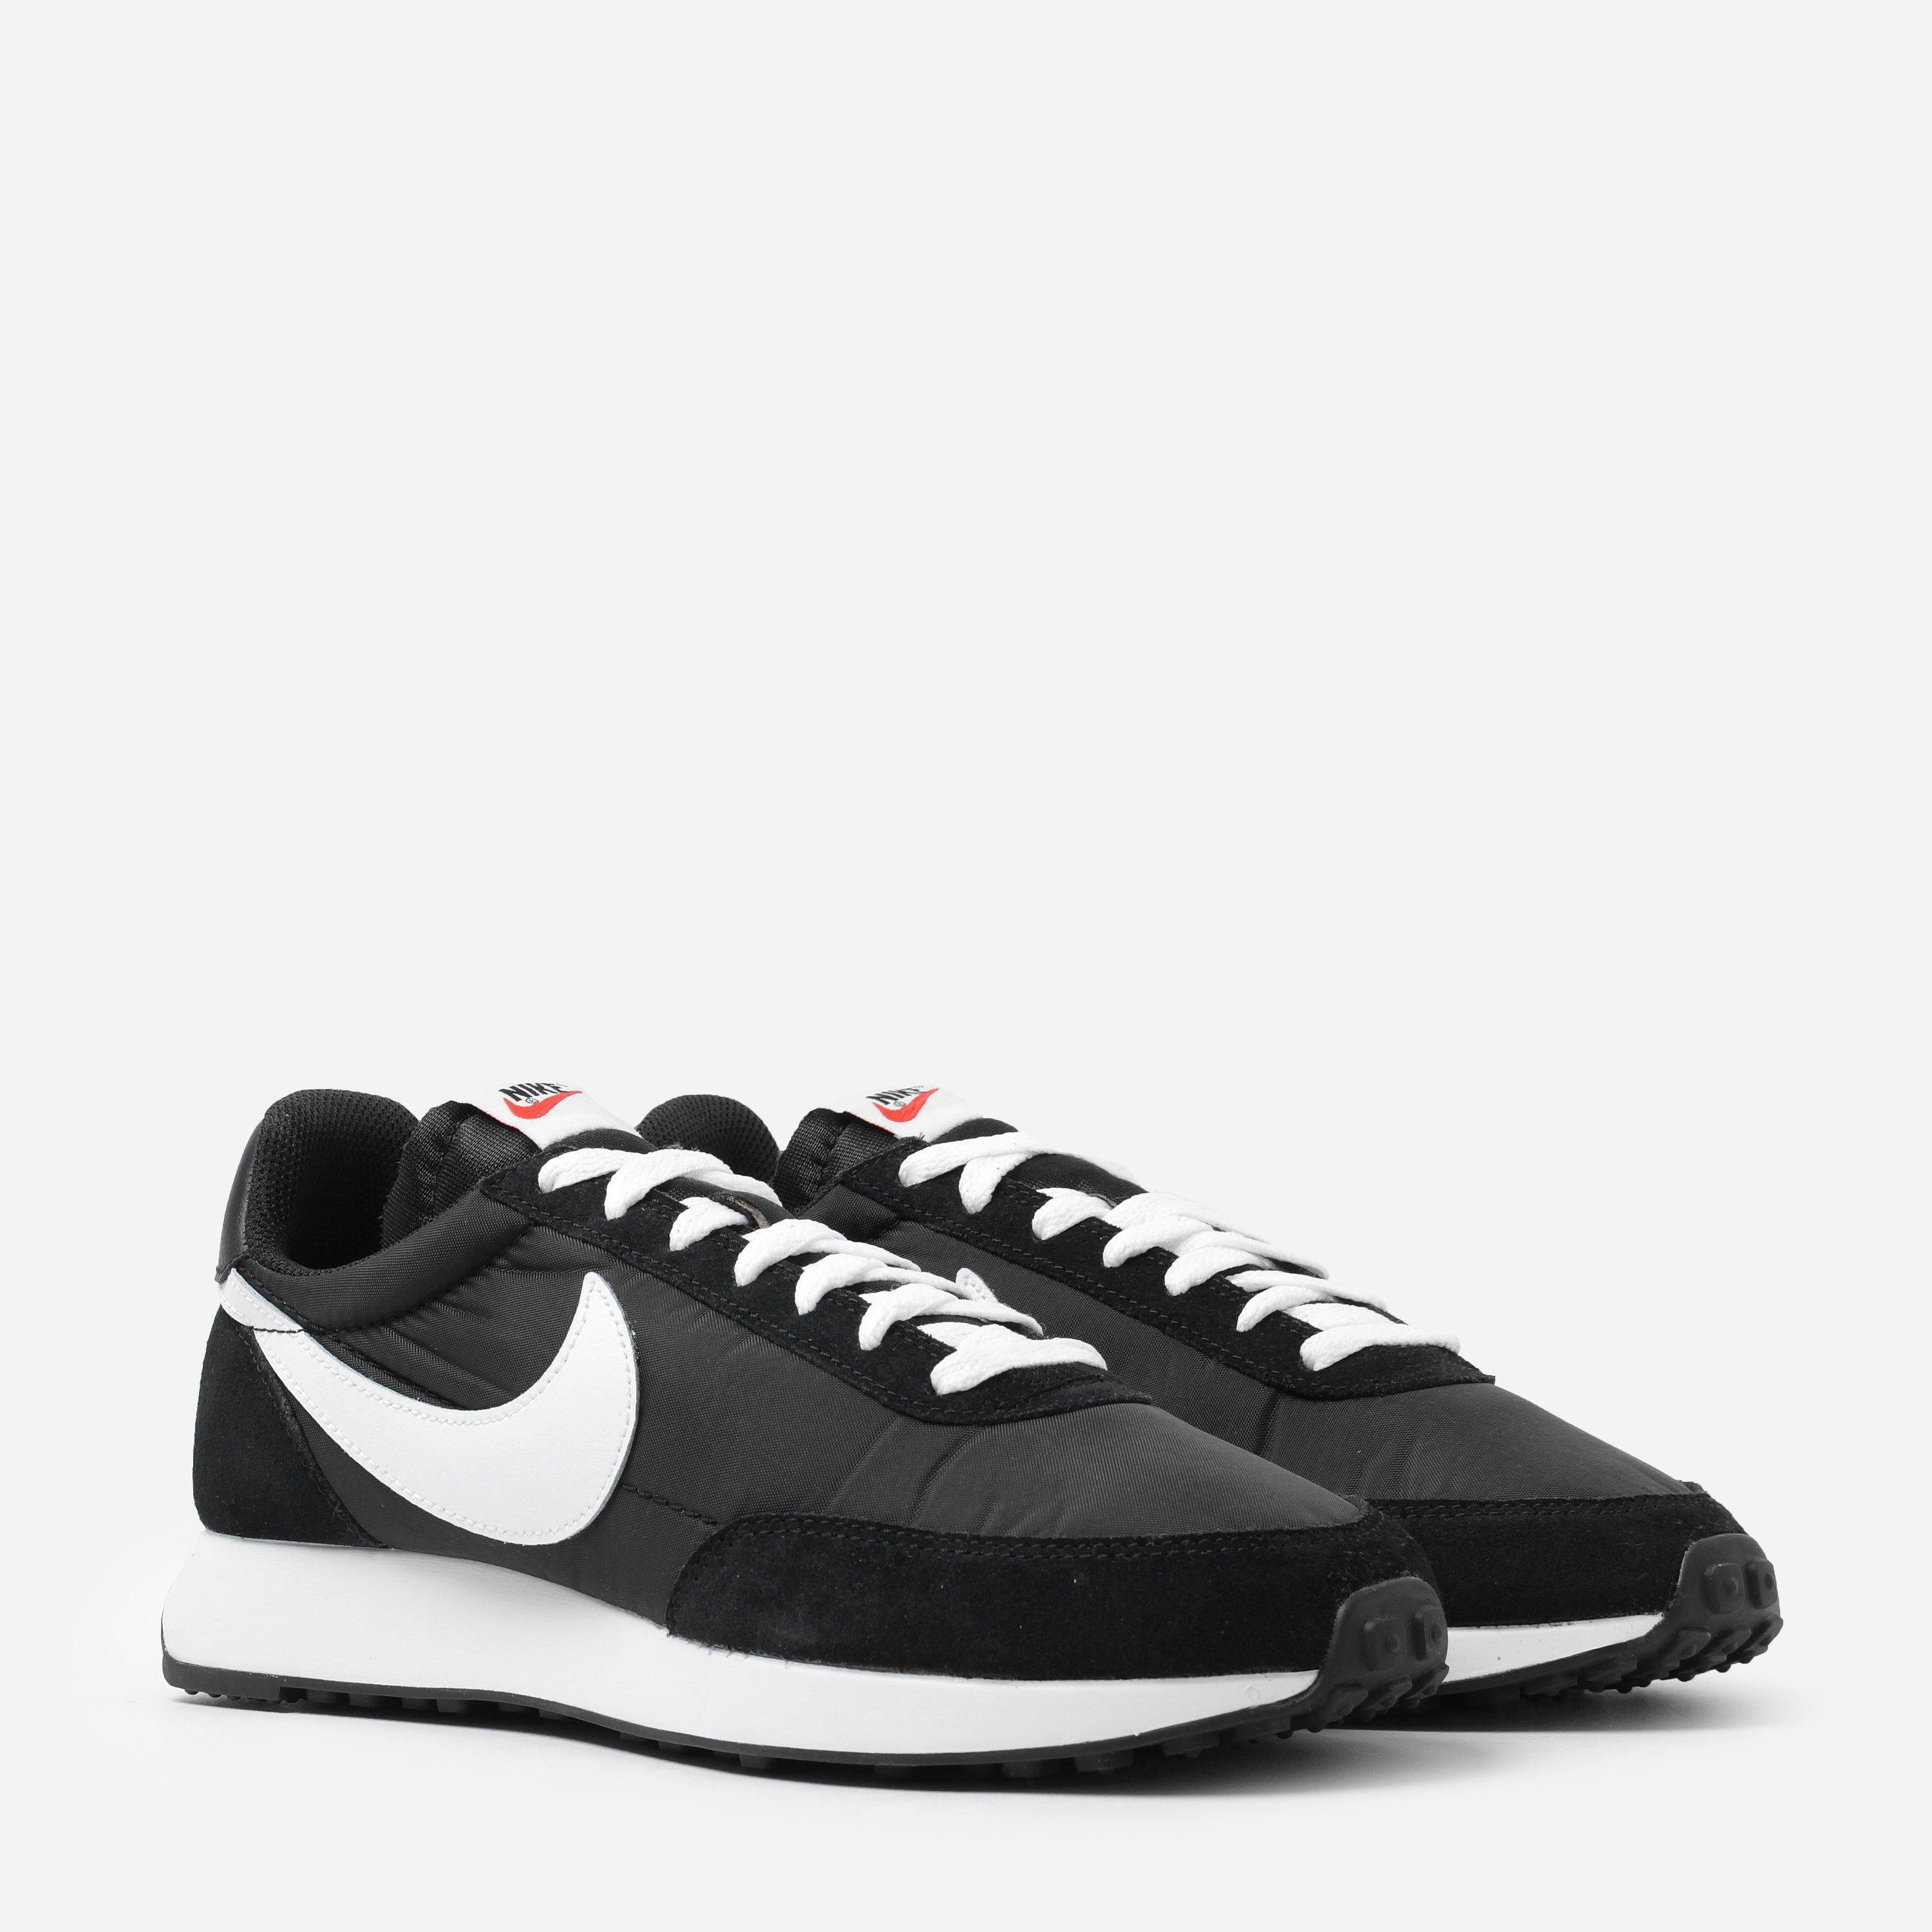 Nike Synthetic Air Tailwind '79 - Shoes in Black/White (Black) for Men -  Save 61% - Lyst